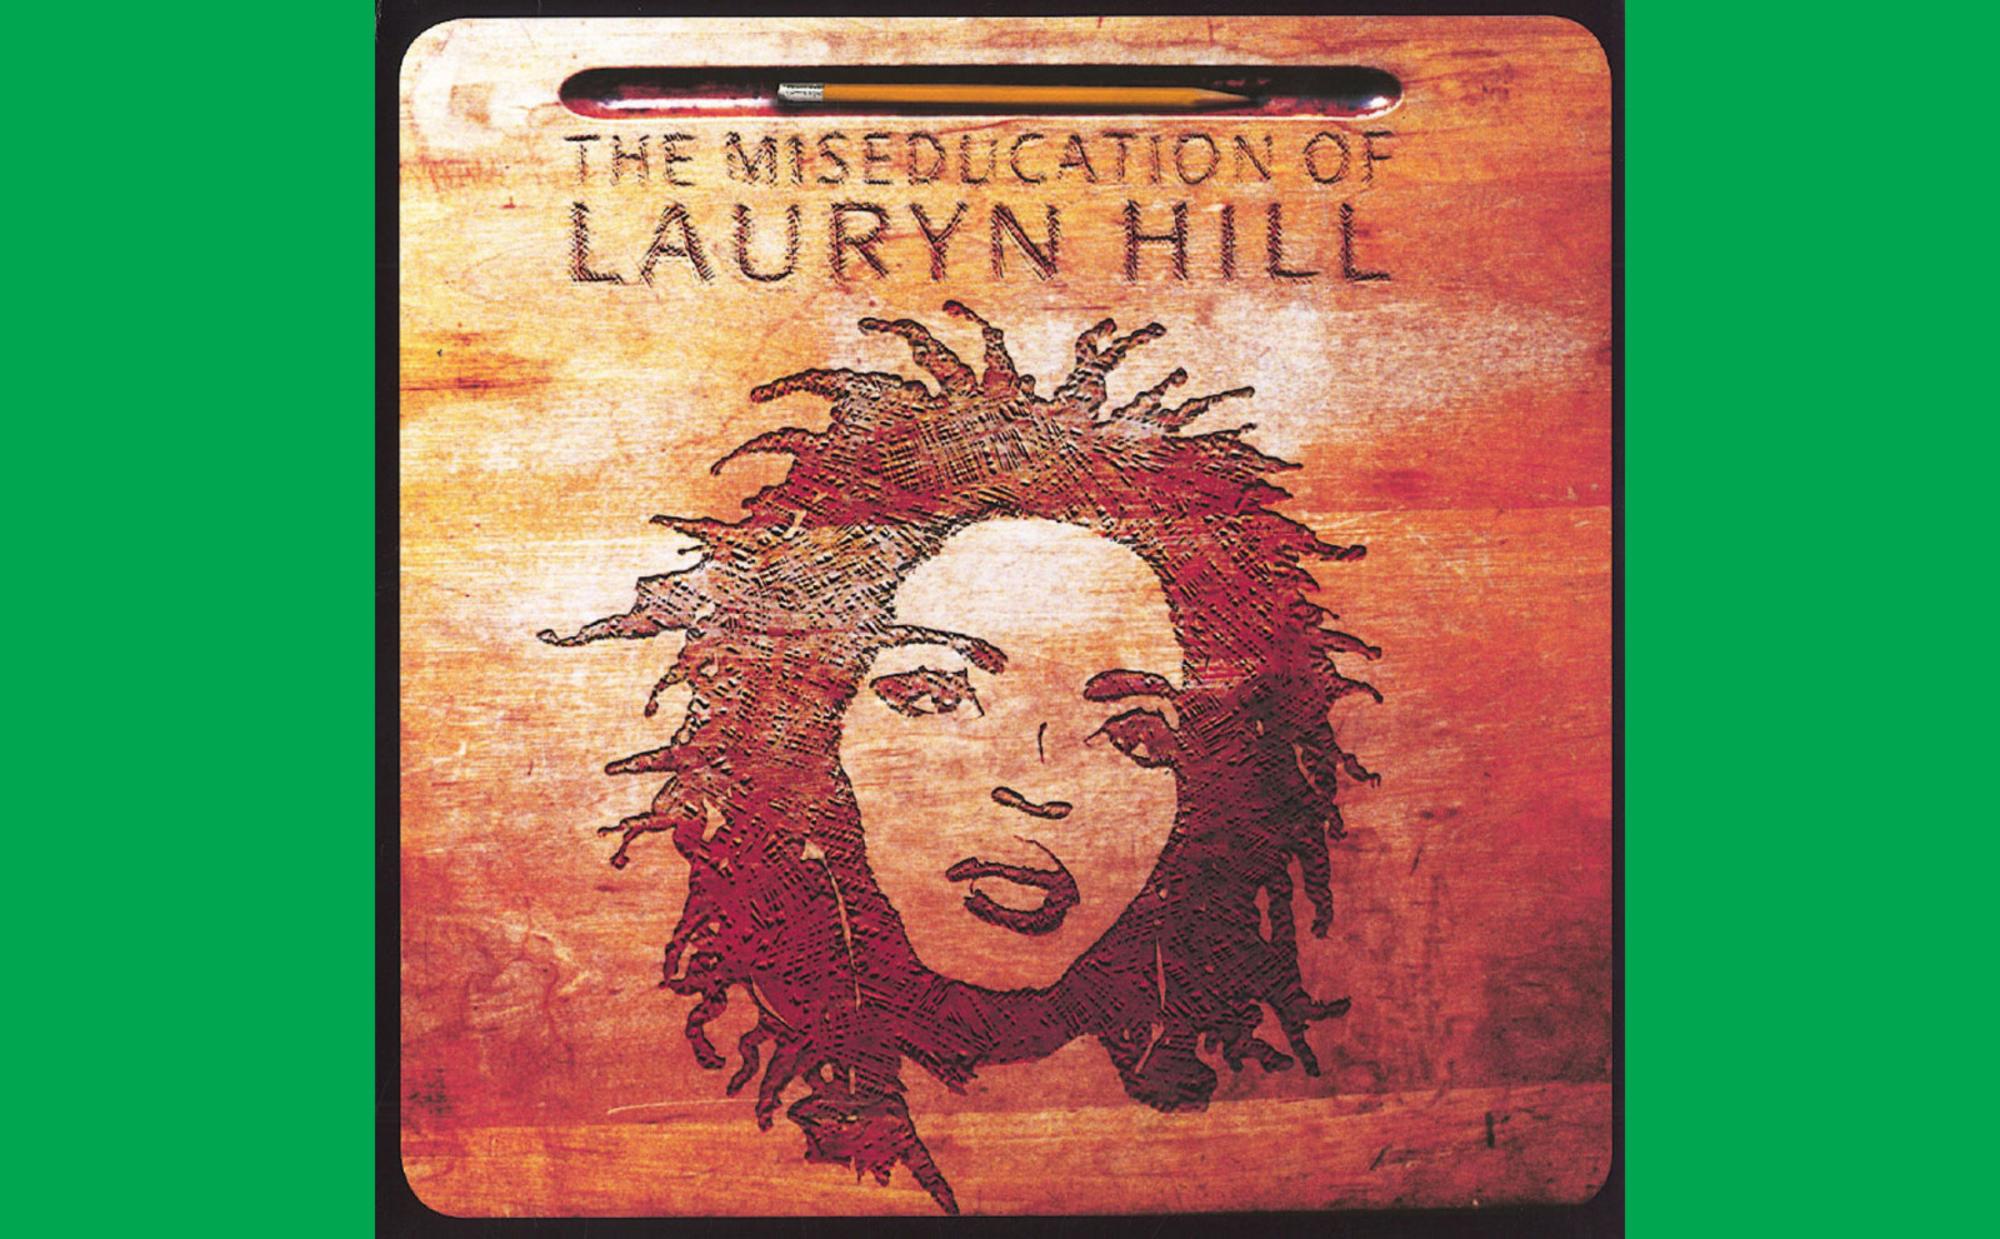 The Miseducation of Lauryn Hill.